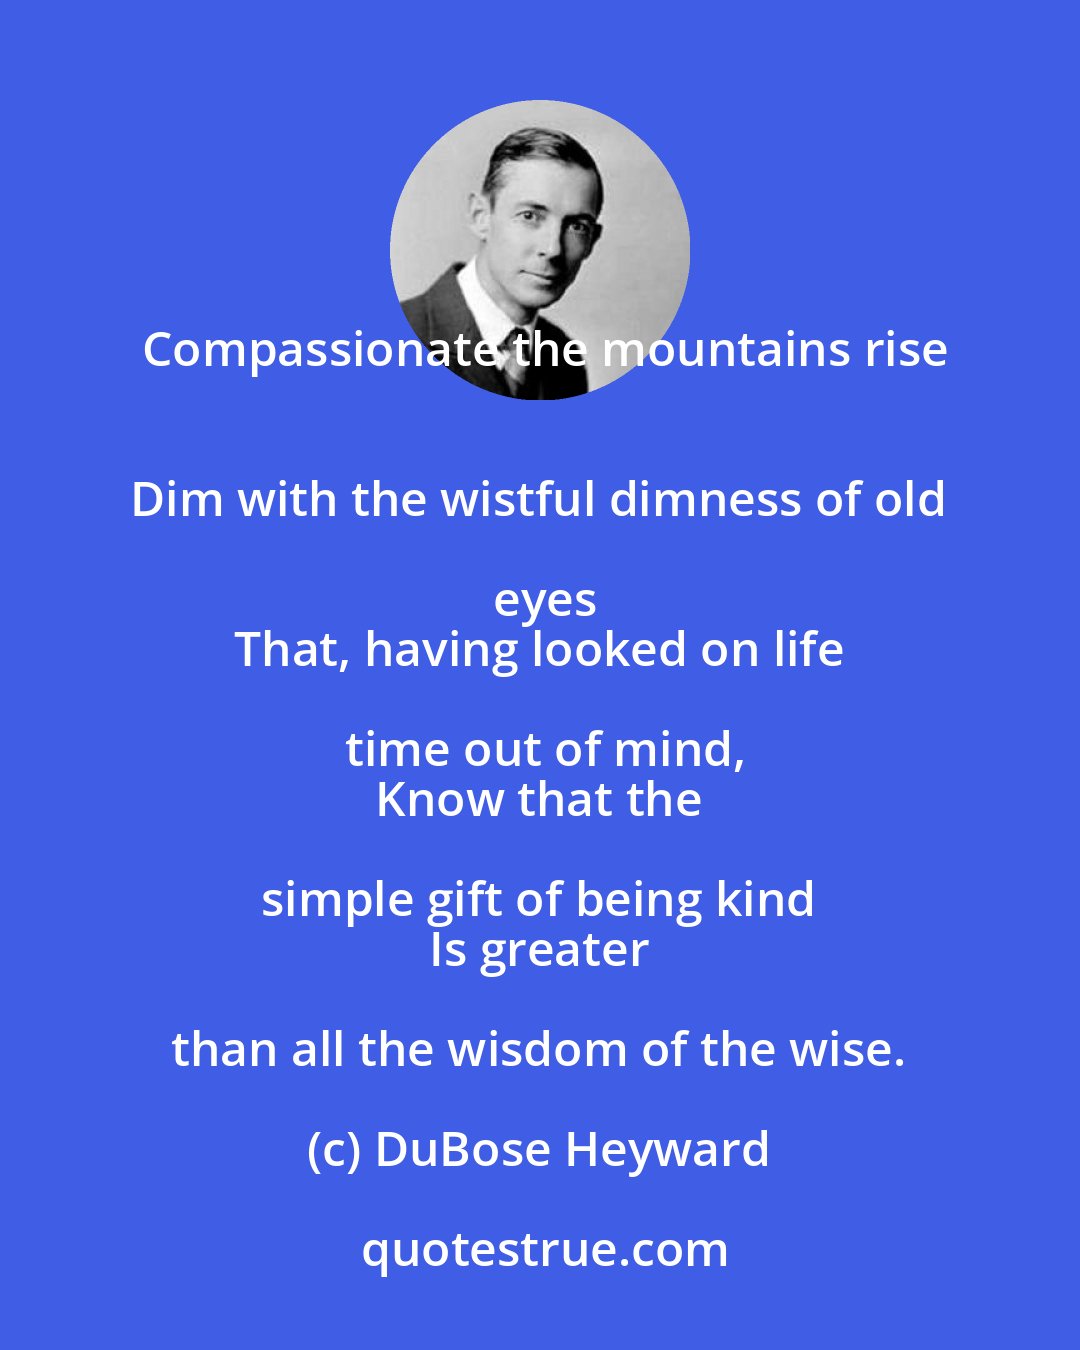 DuBose Heyward: Compassionate the mountains rise
 Dim with the wistful dimness of old eyes
 That, having looked on life time out of mind,
 Know that the simple gift of being kind 
 Is greater than all the wisdom of the wise.